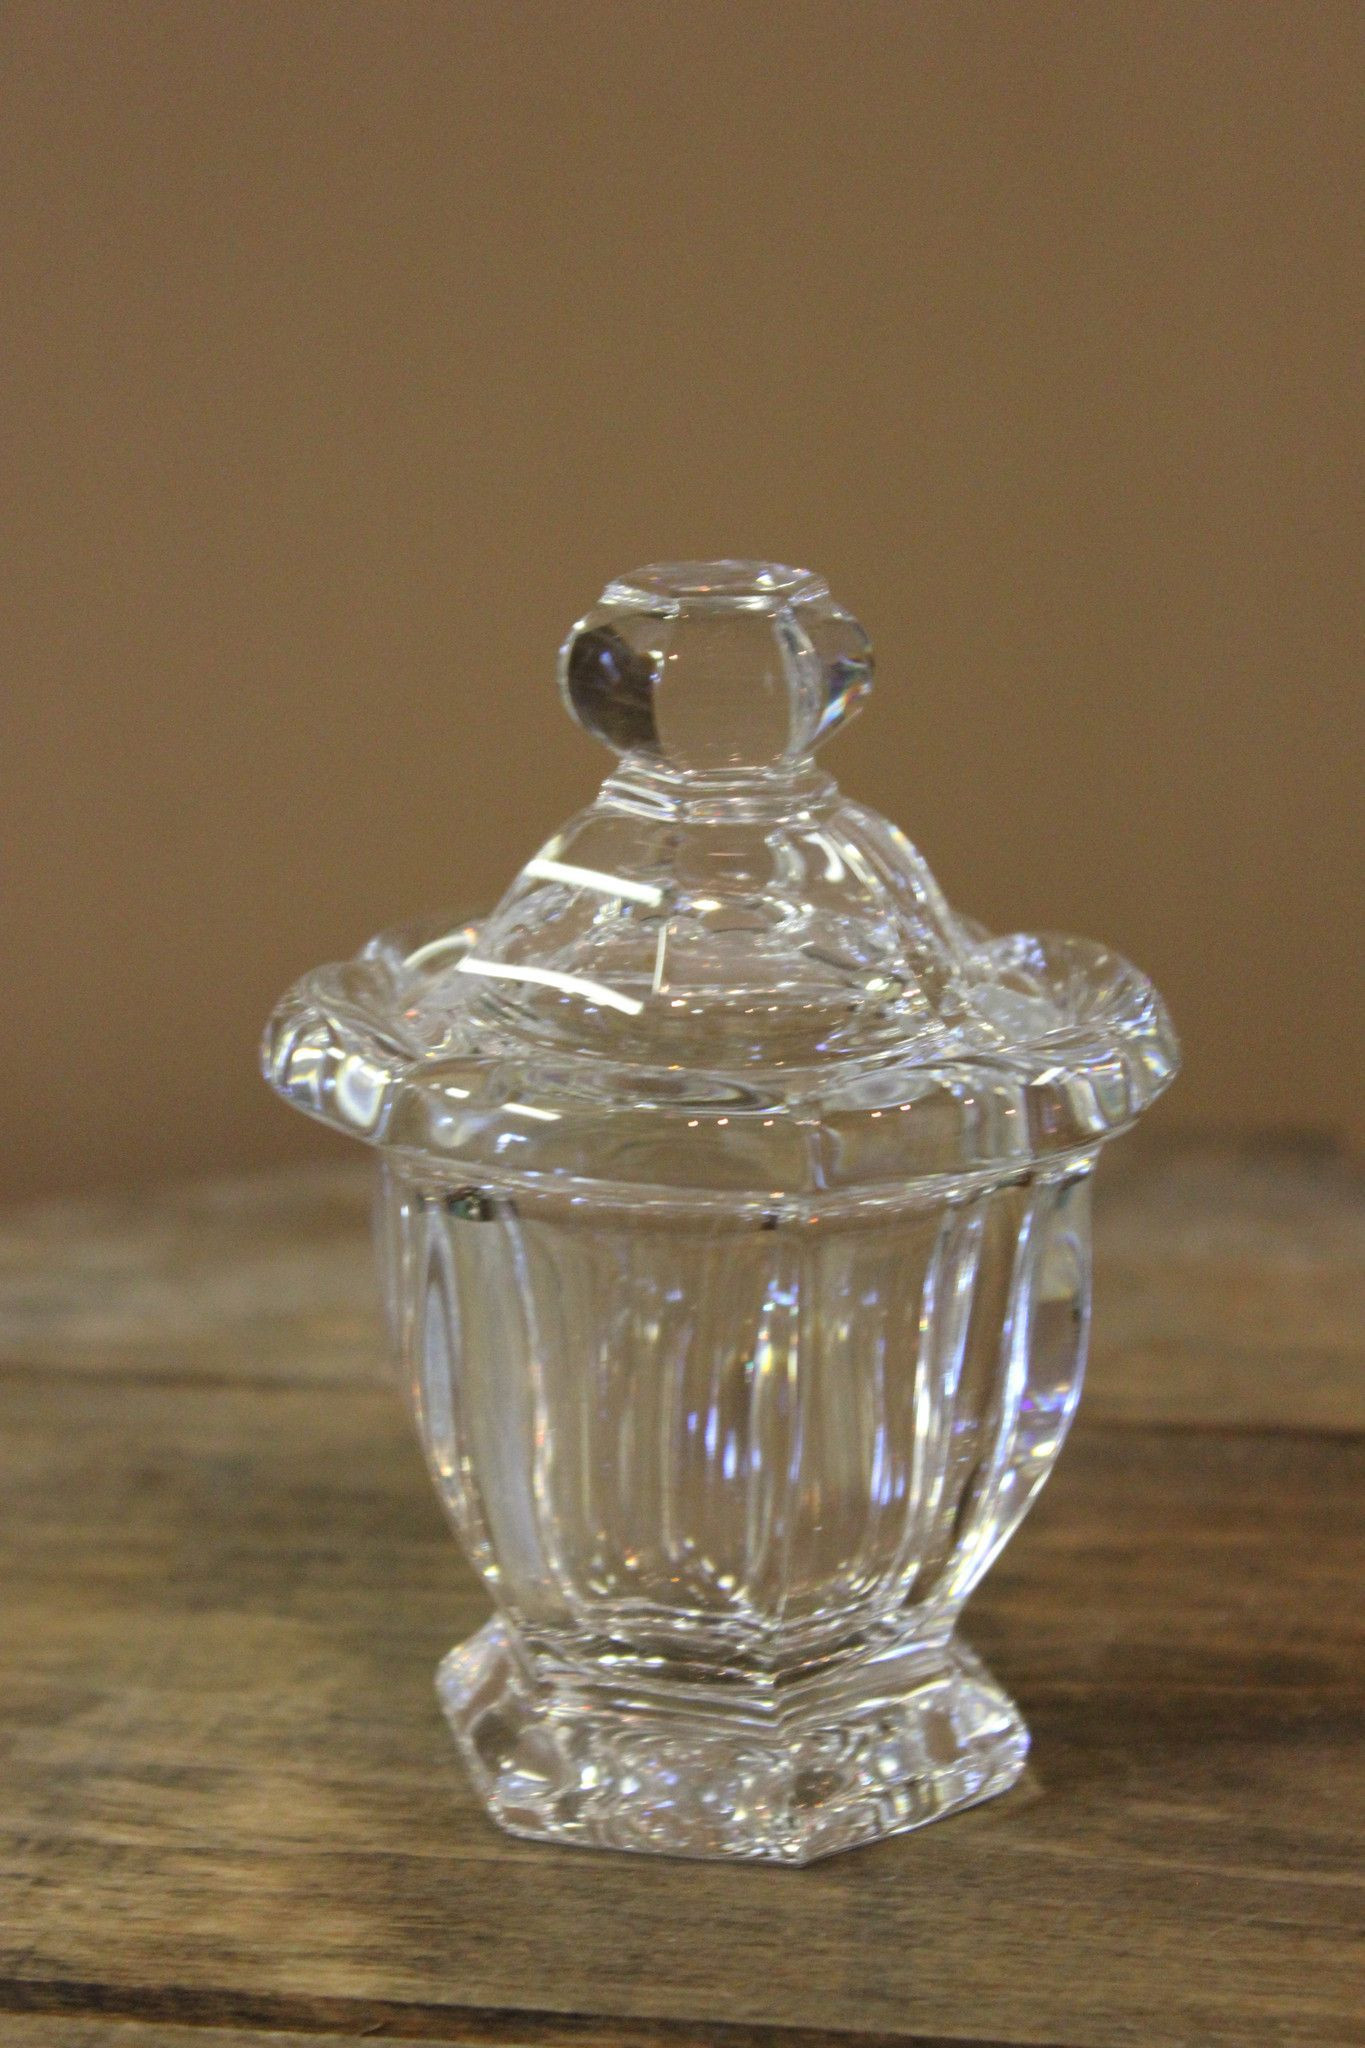 14 Perfect St Louis Crystal France Vase 2024 free download st louis crystal france vase of serve mustard or jam in style with this beautiful crystal condiment with regard to serve mustard or jam in style with this beautiful crystal condiment jar fea